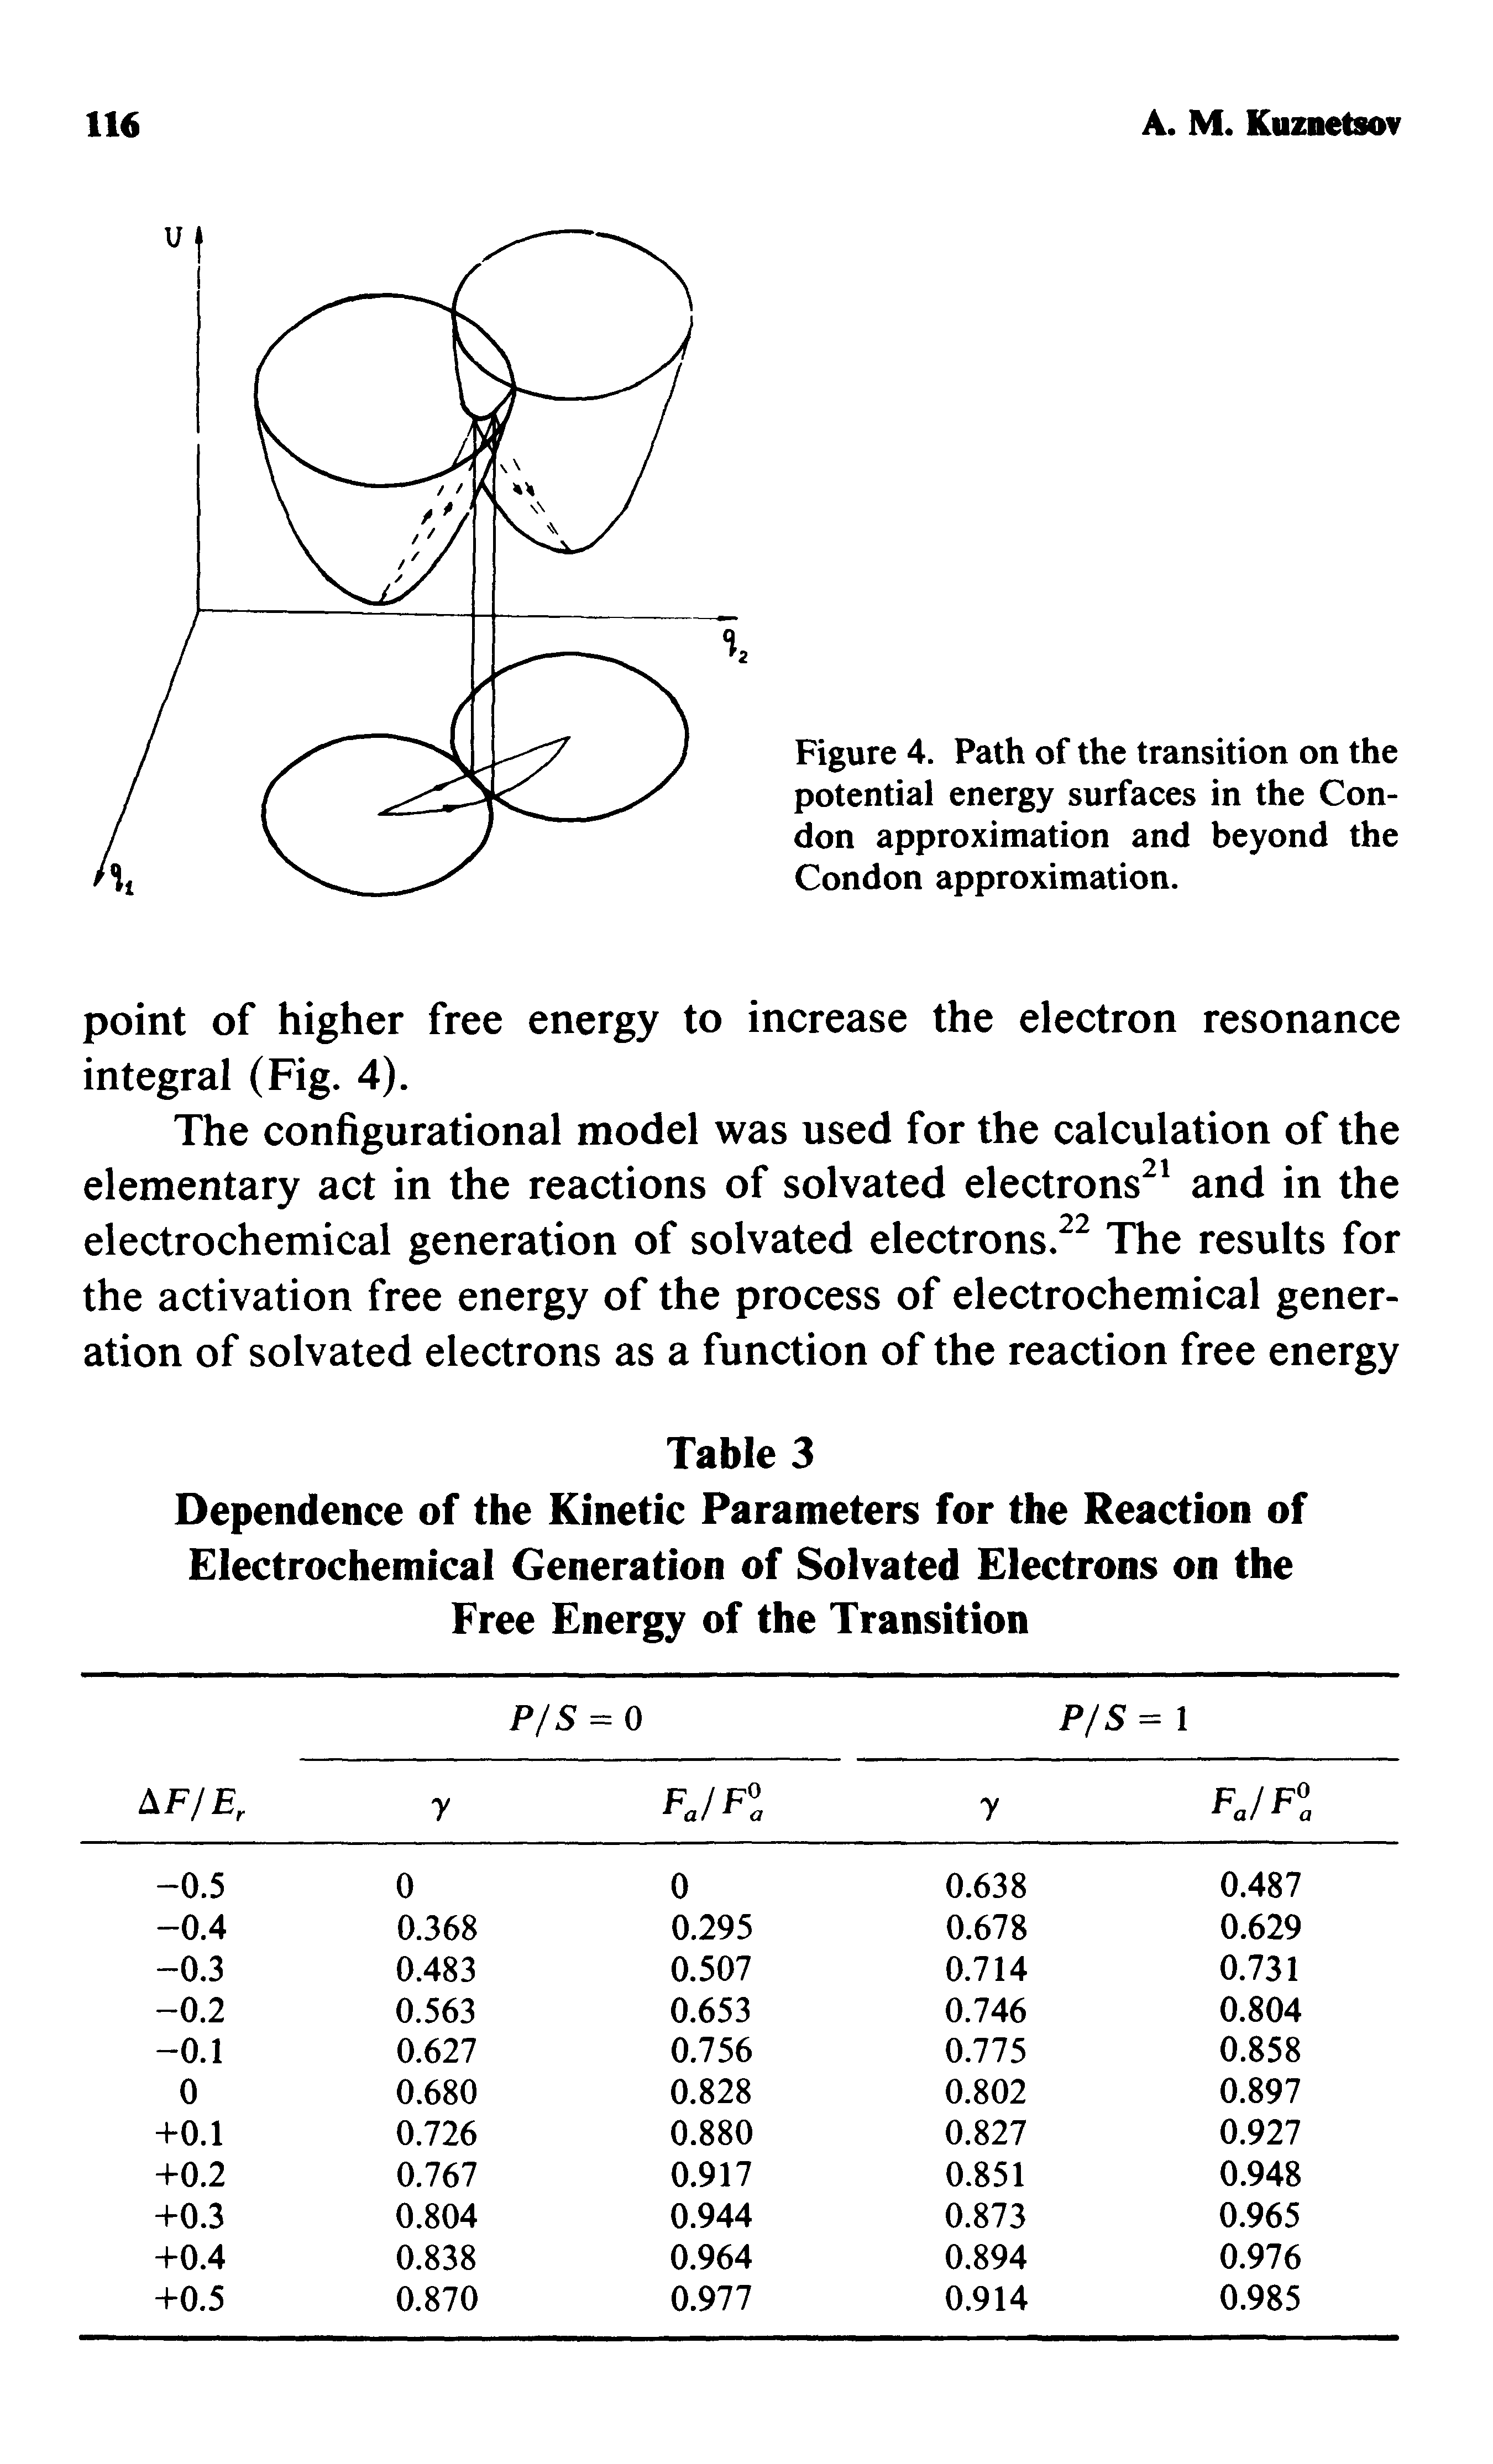 Figure 4. Path of the transition on the potential energy surfaces in the Condon approximation and beyond the Condon approximation.